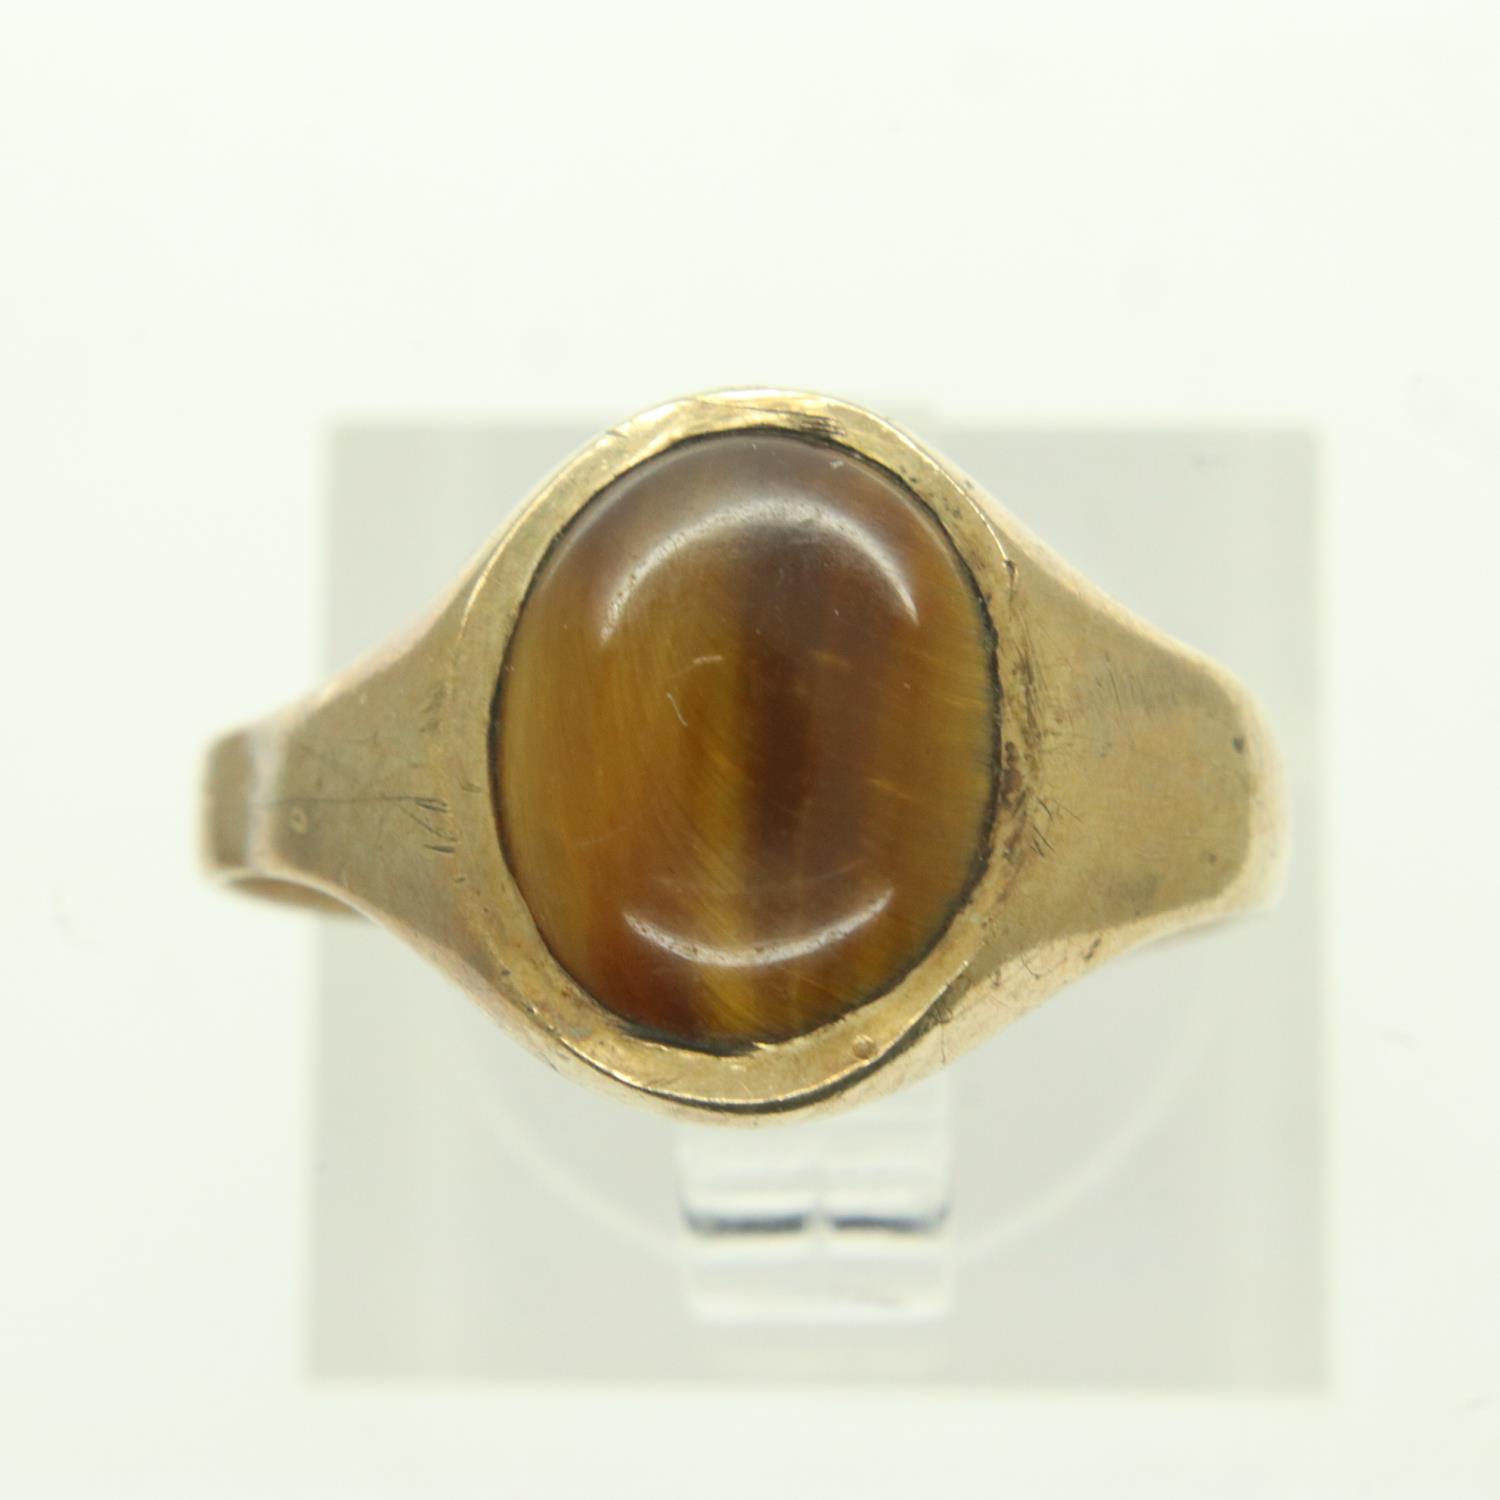 9ct gold gents ring set with tigers eye cabochon, misshapen, 2.5g. UK P&P Group 0 (£6+VAT for the